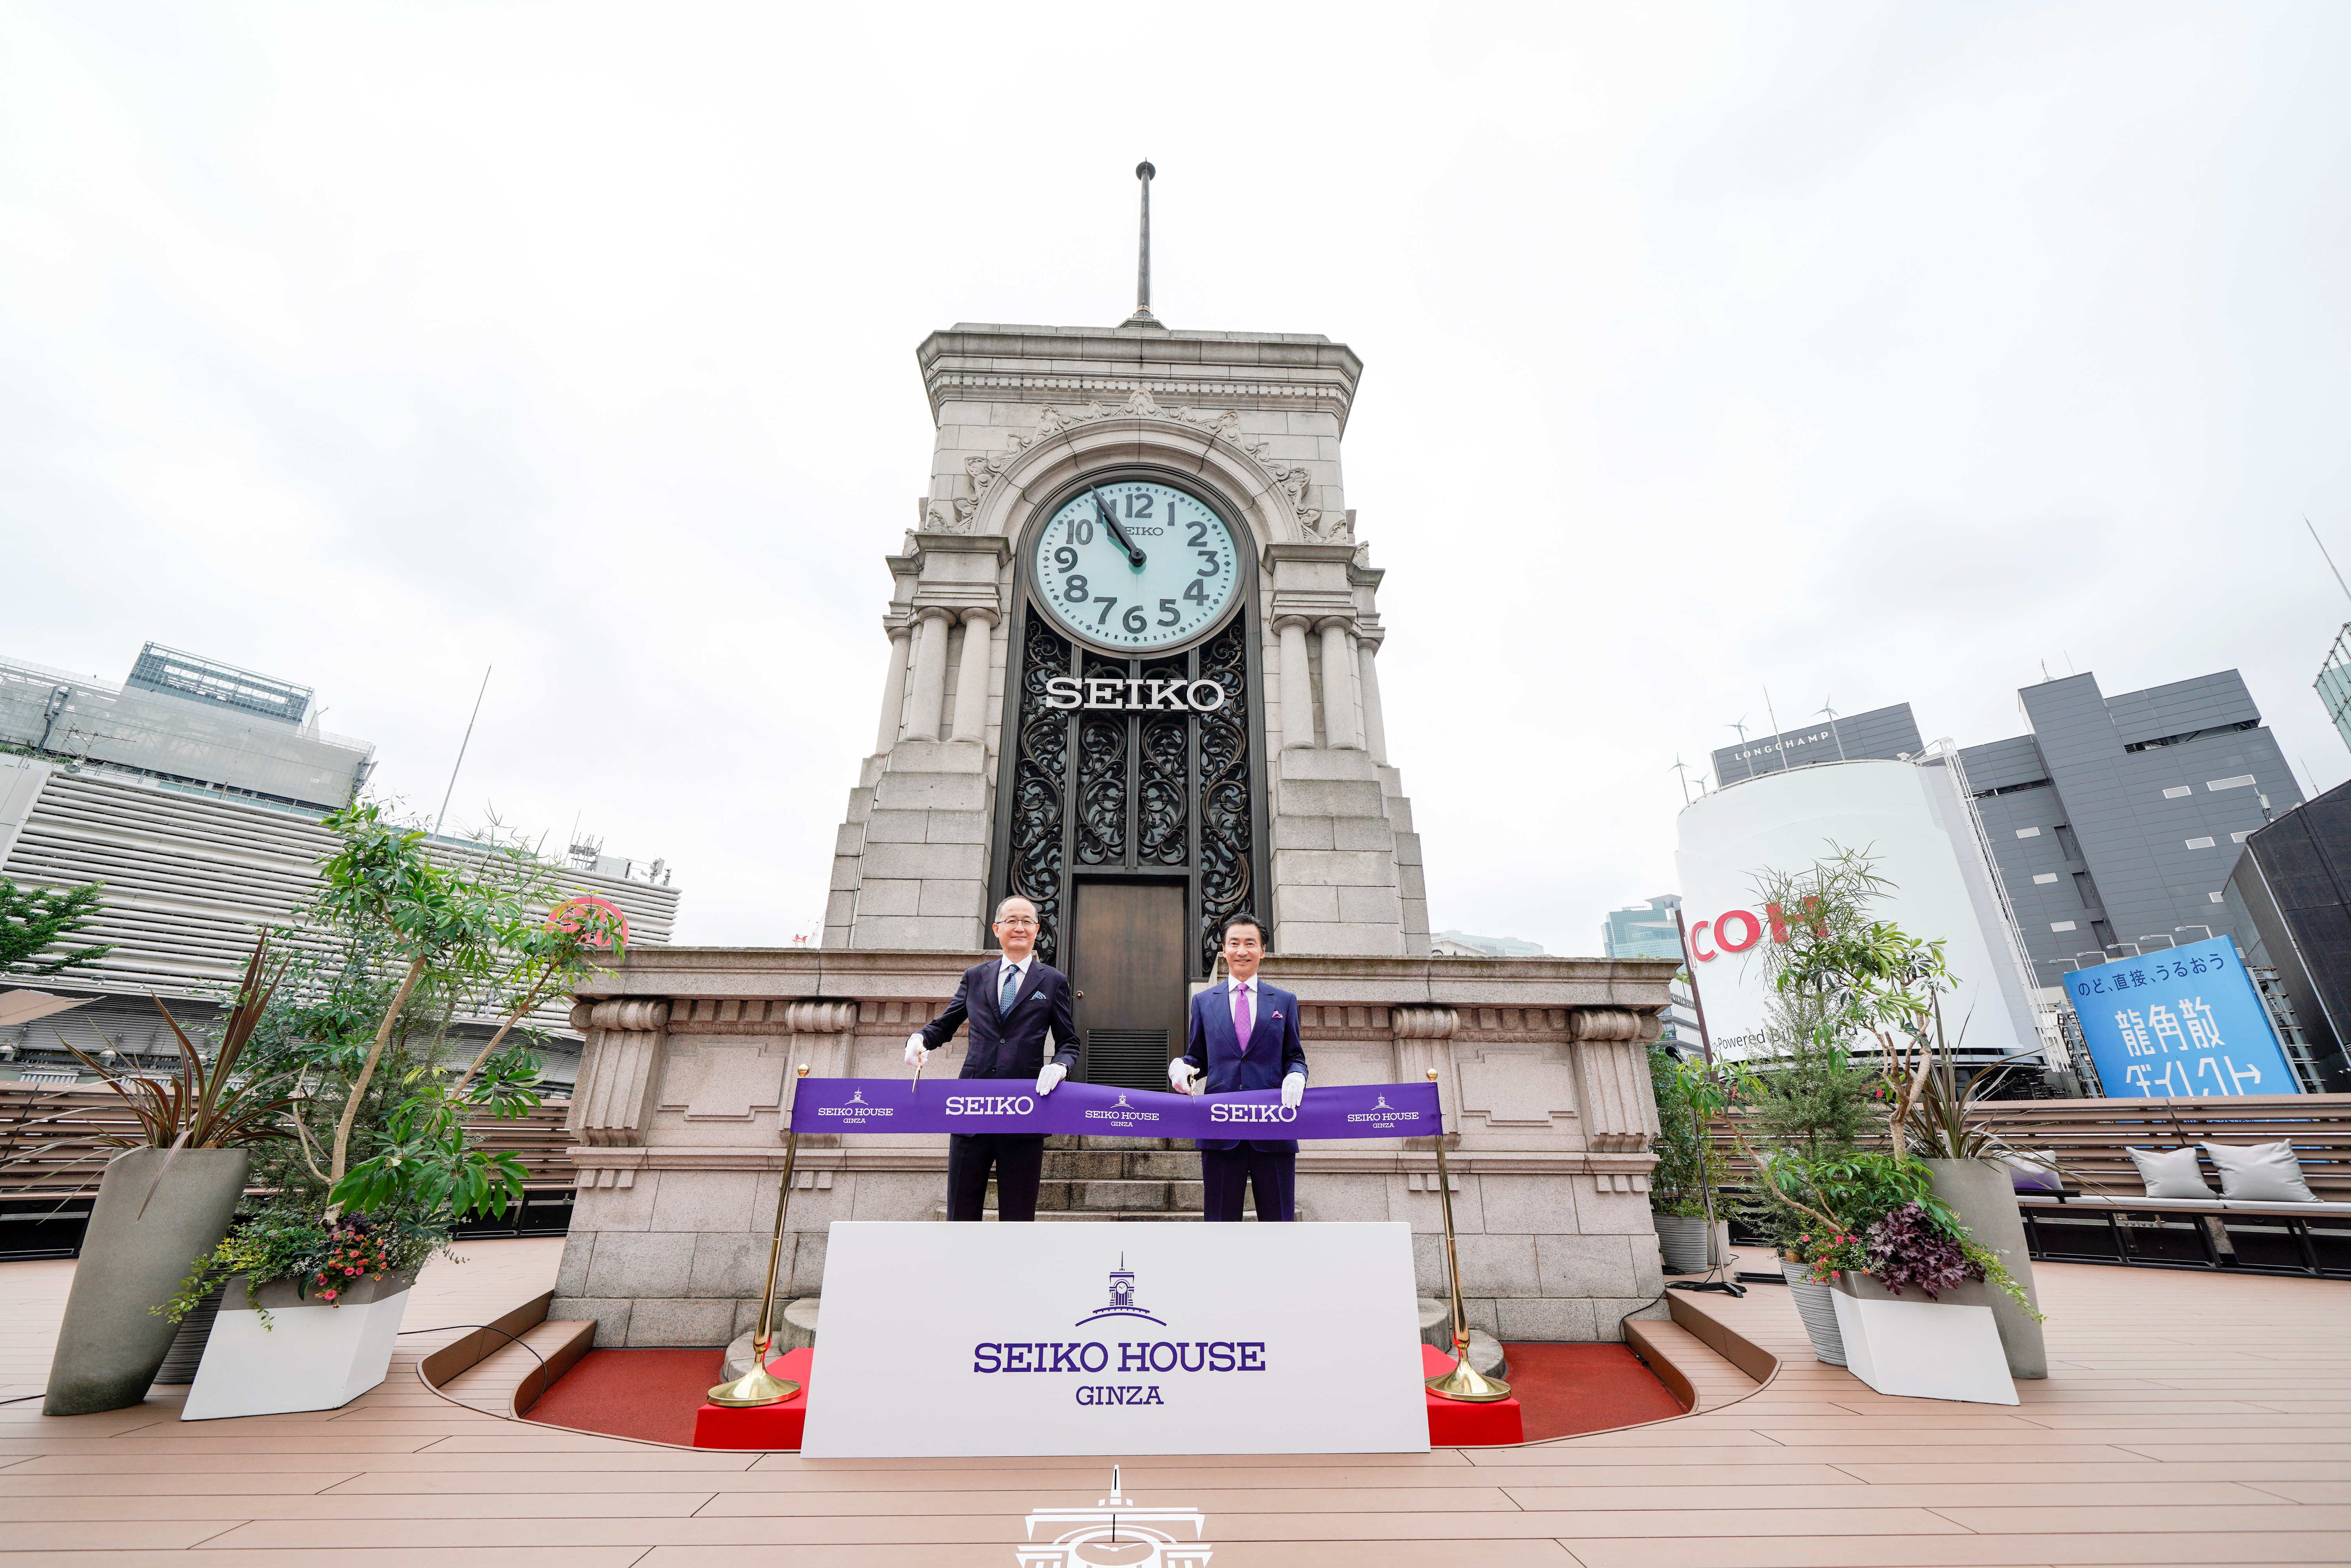 SEIKO HOUSE GINZA Opens Friday, June 10. On its 90th anniversary, the clock  tower building overlooking the main Ginza intersection will be re-launched  as Seiko's brand communications hub. | News | Seiko